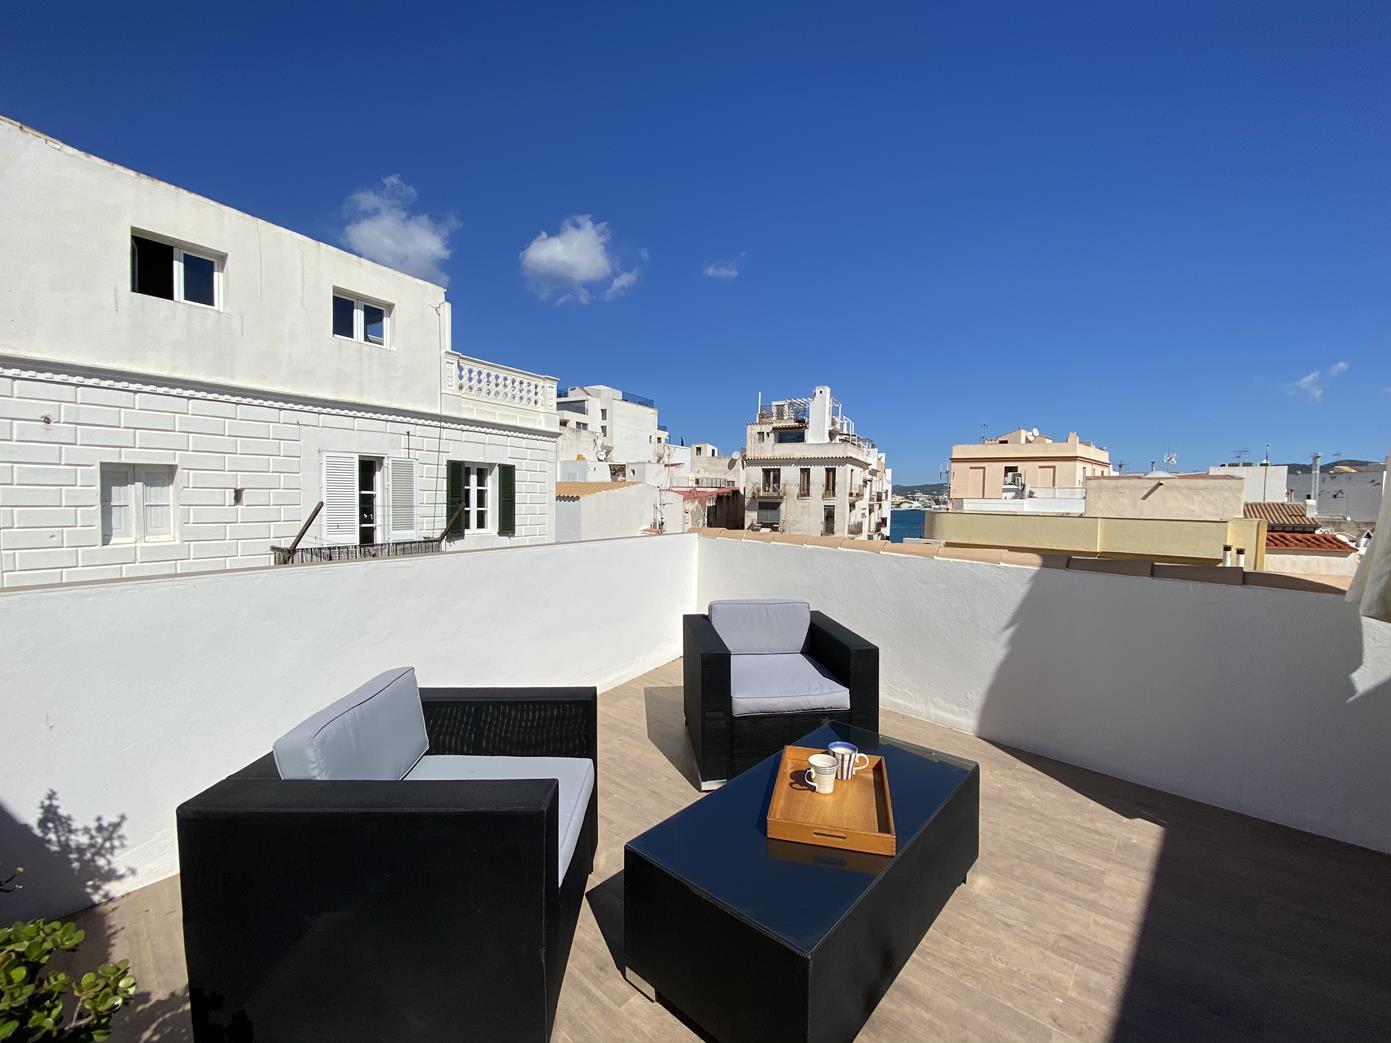 Duplex apartment in the lower old town of Ibiza